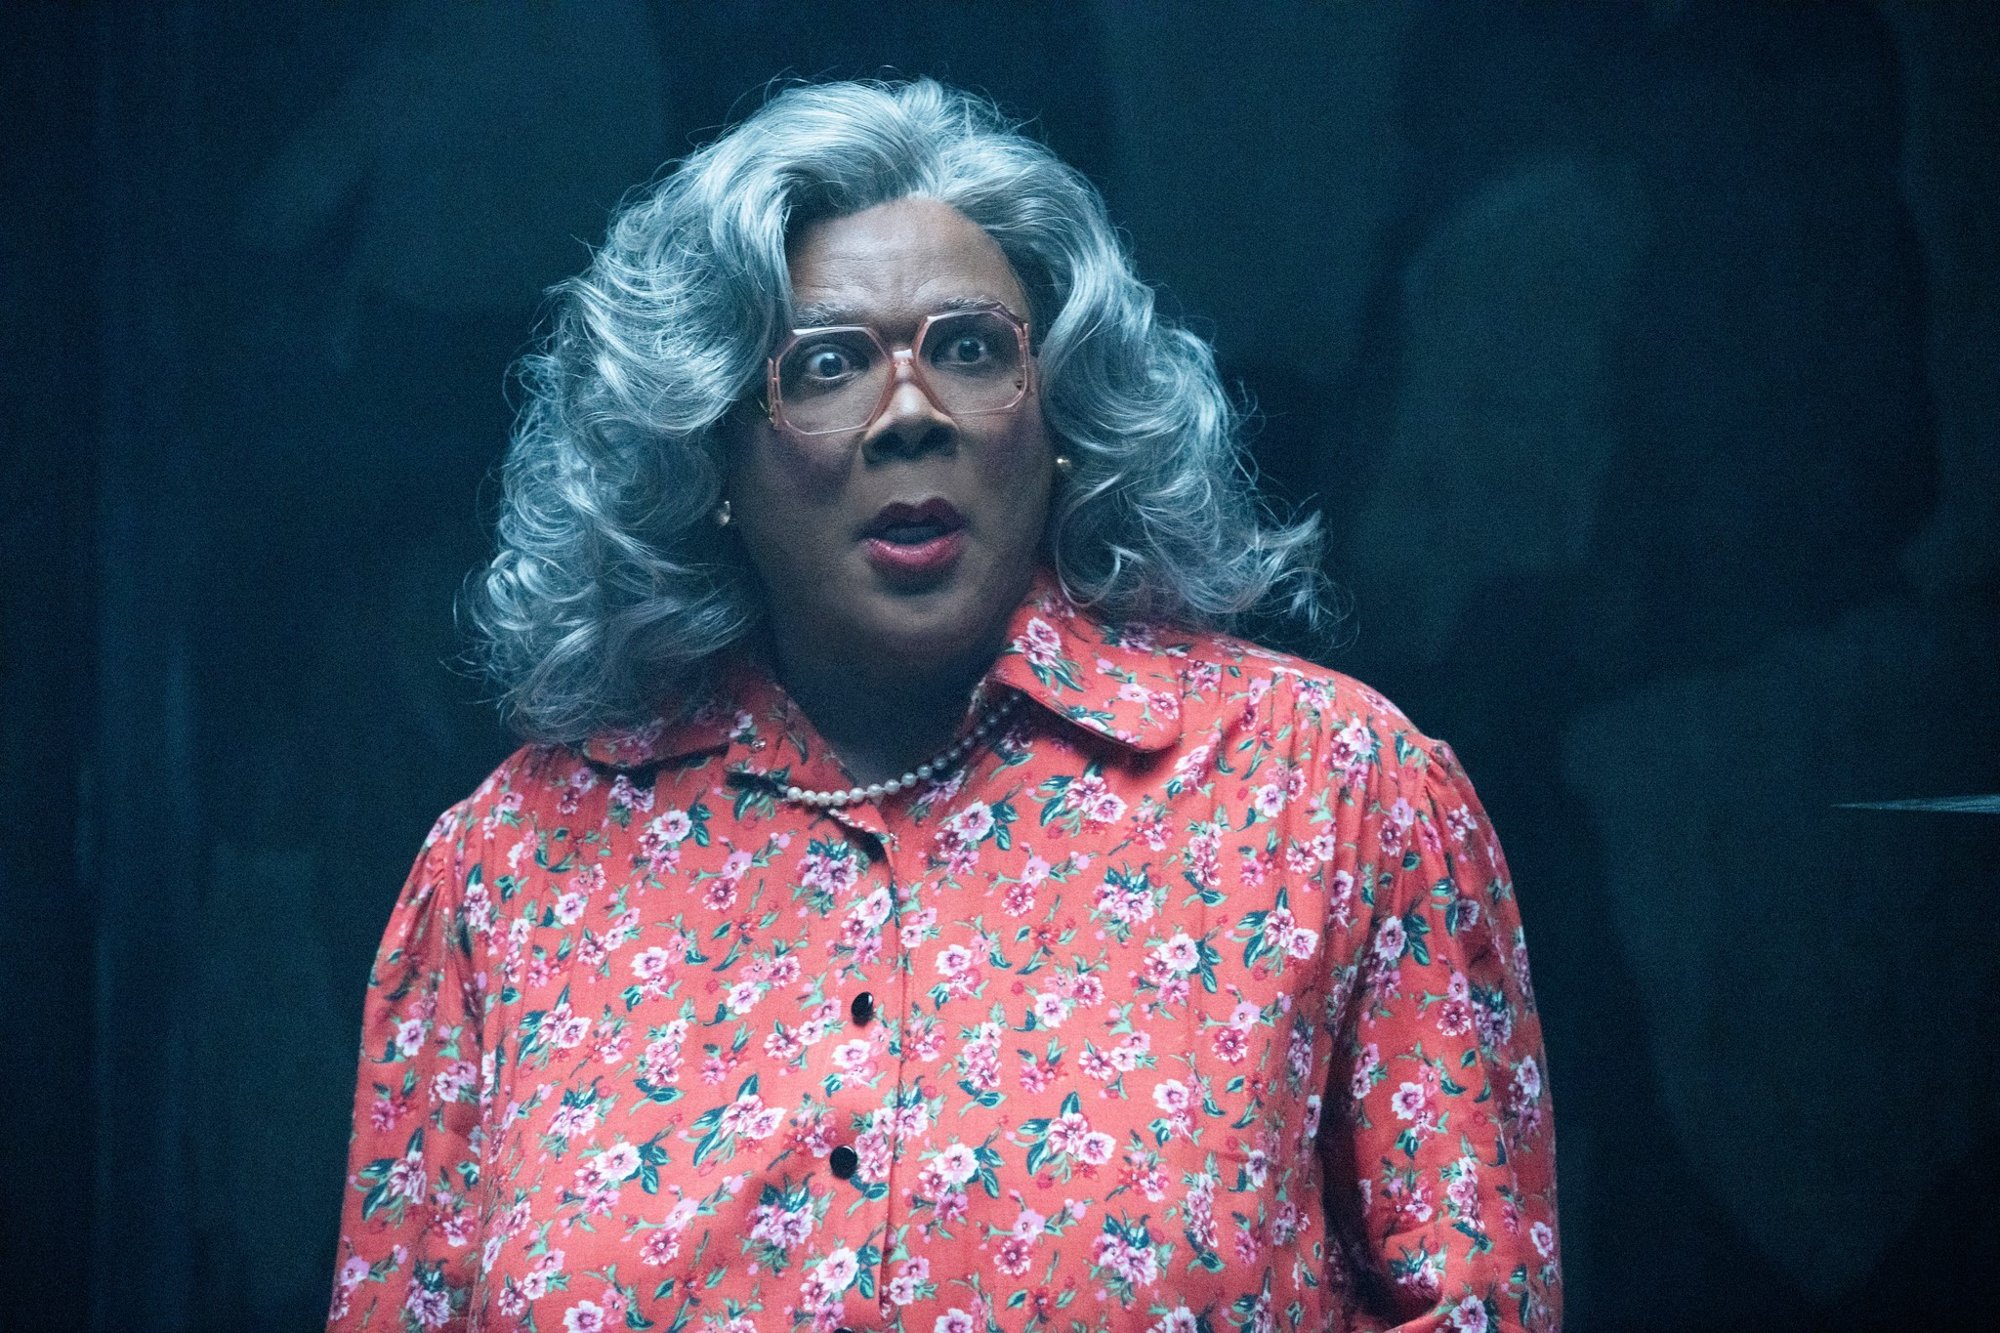 Tyler Perry stars as Madea in Lionsgate Films' Boo 2! A Madea Halloween (2017)